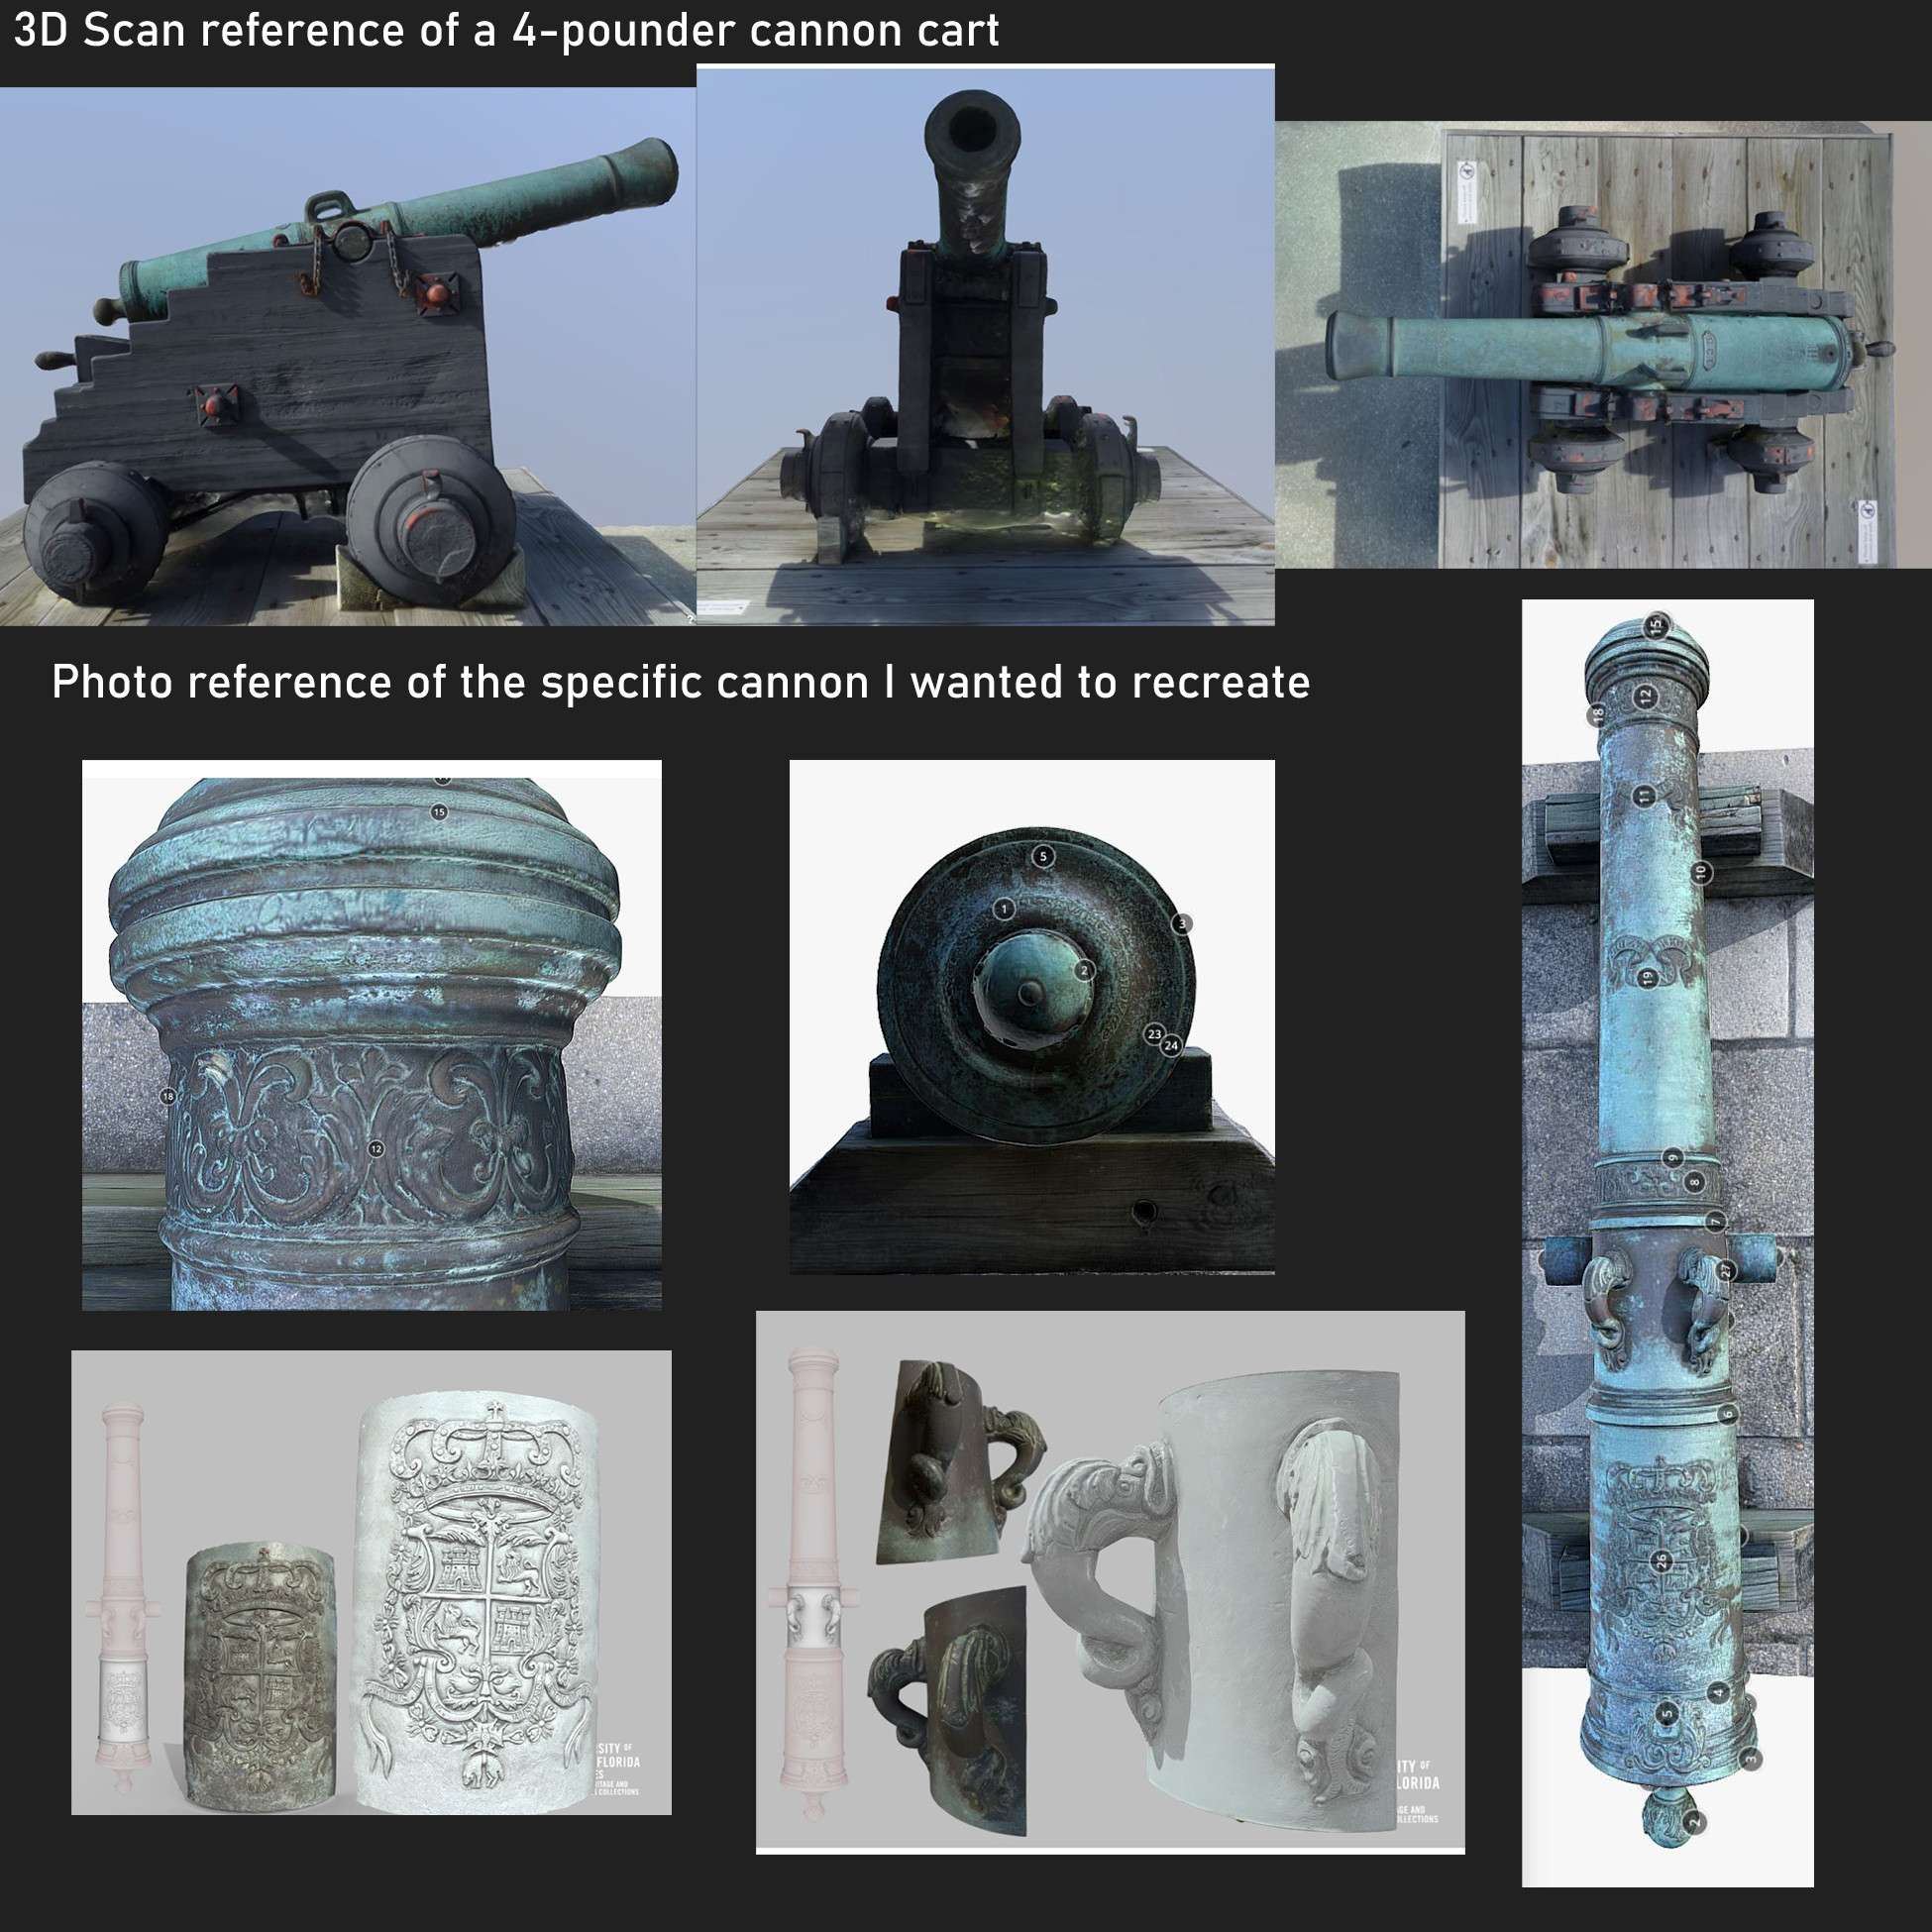 3D scan reference of a contemporary 4-pounder cannon cart and the ornate 18-pounder cannon I wanted to recreate